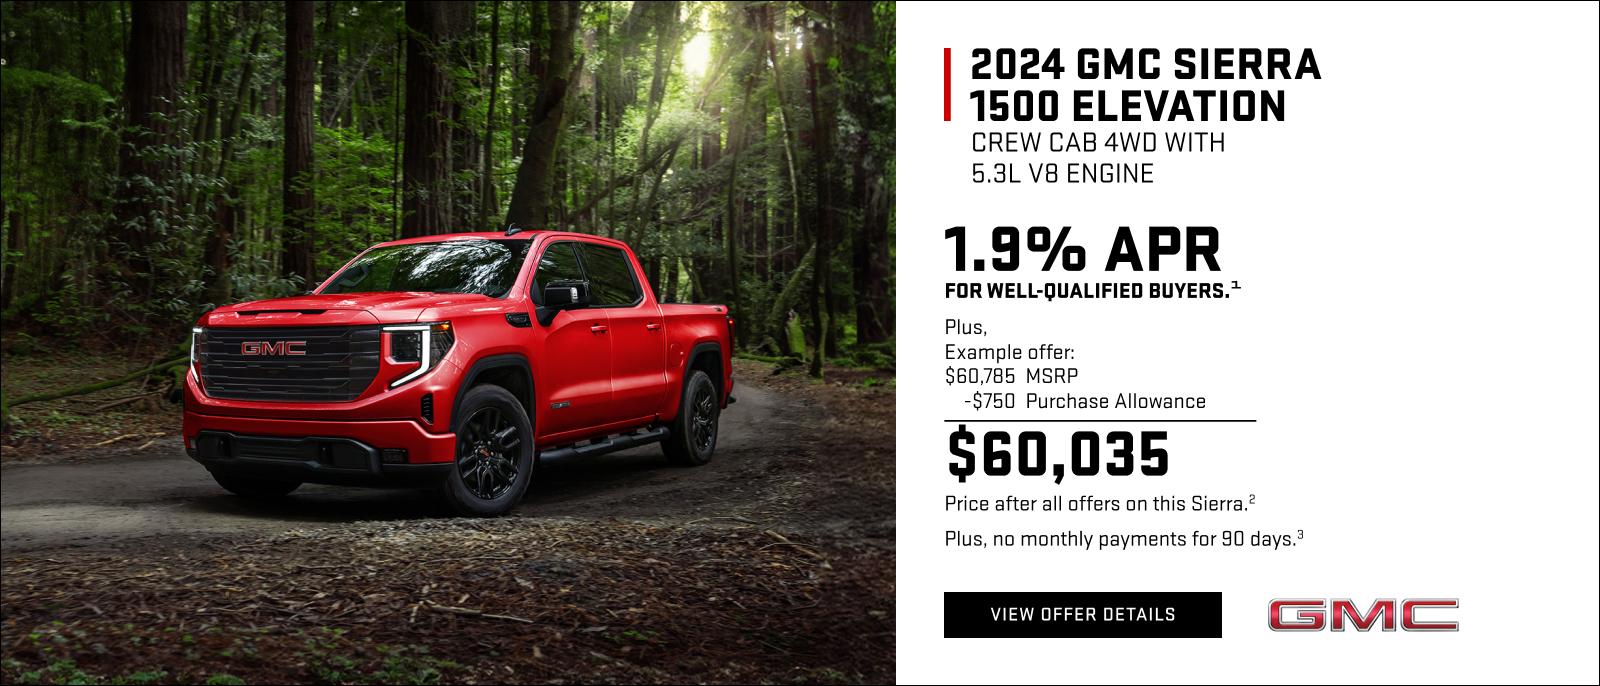 1.9% APR for well-qualified buyers.1

Plus,

Example offer:
$60,785 MSRP
$750 Purchase Allowance
$60,035 Price after all offers on this Sierra.2

Plus, no monthly payments for 90 days. 3